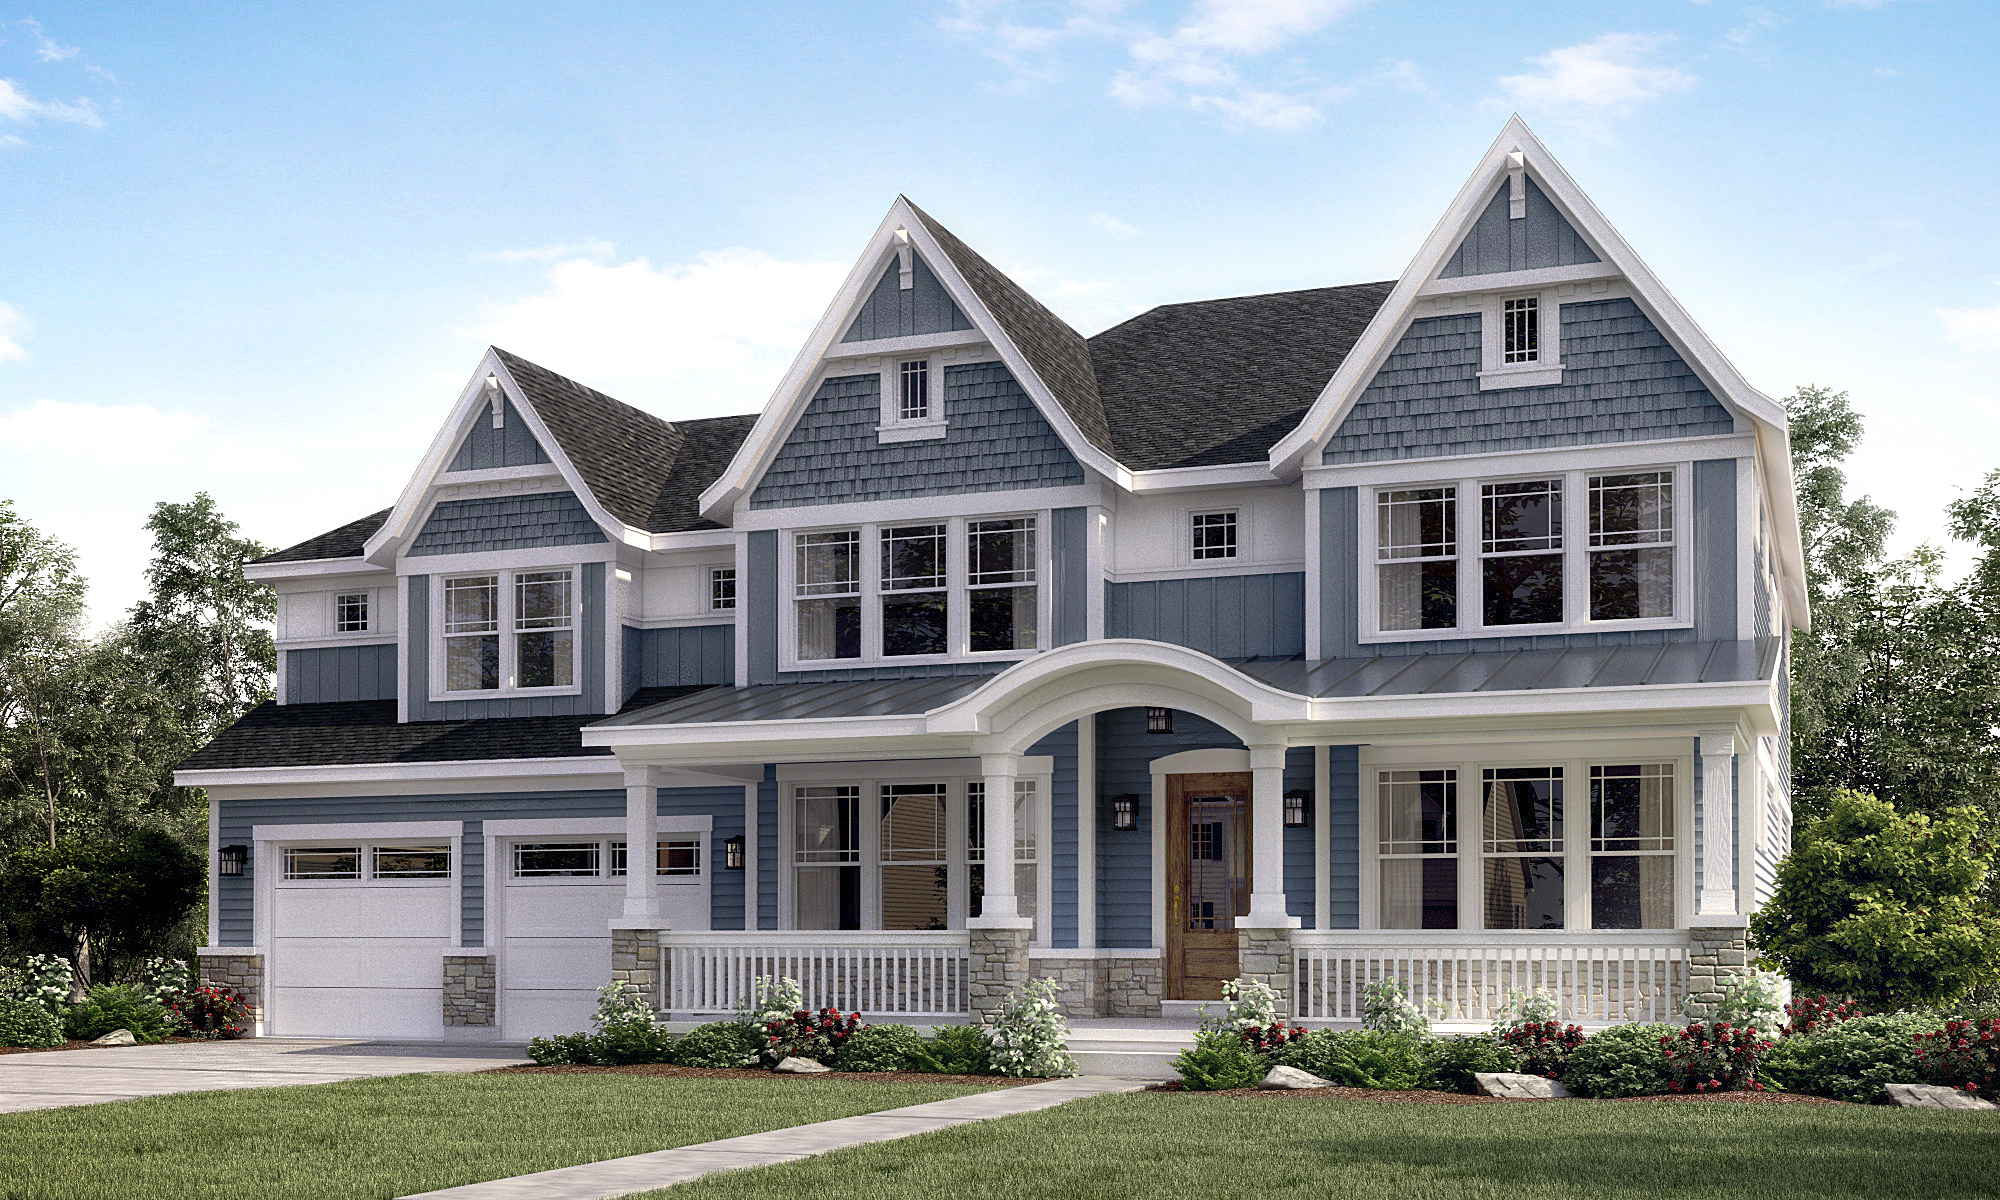 Rendering of a large two story home with two car garage and large porch